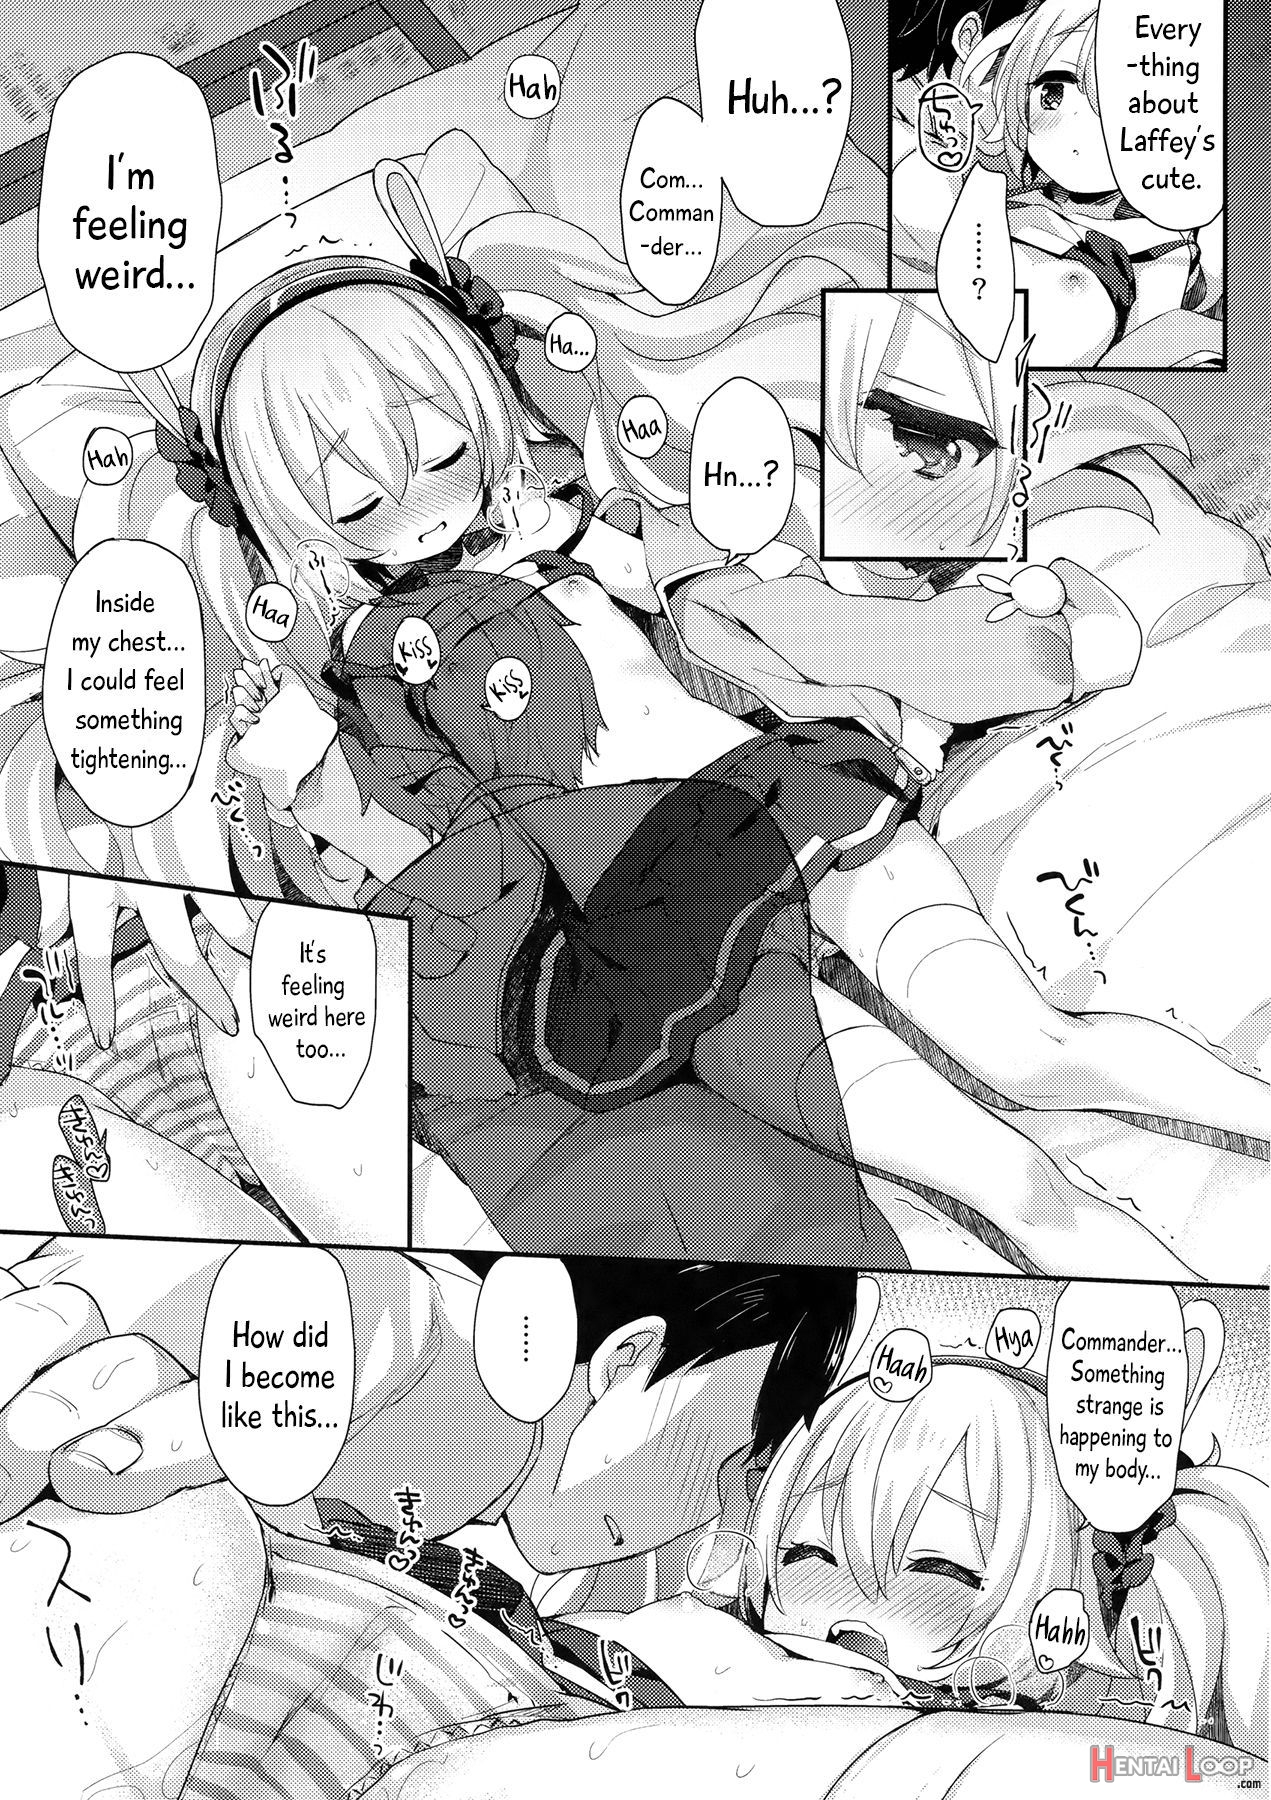 Commander, Will You... With Laffey? page 10